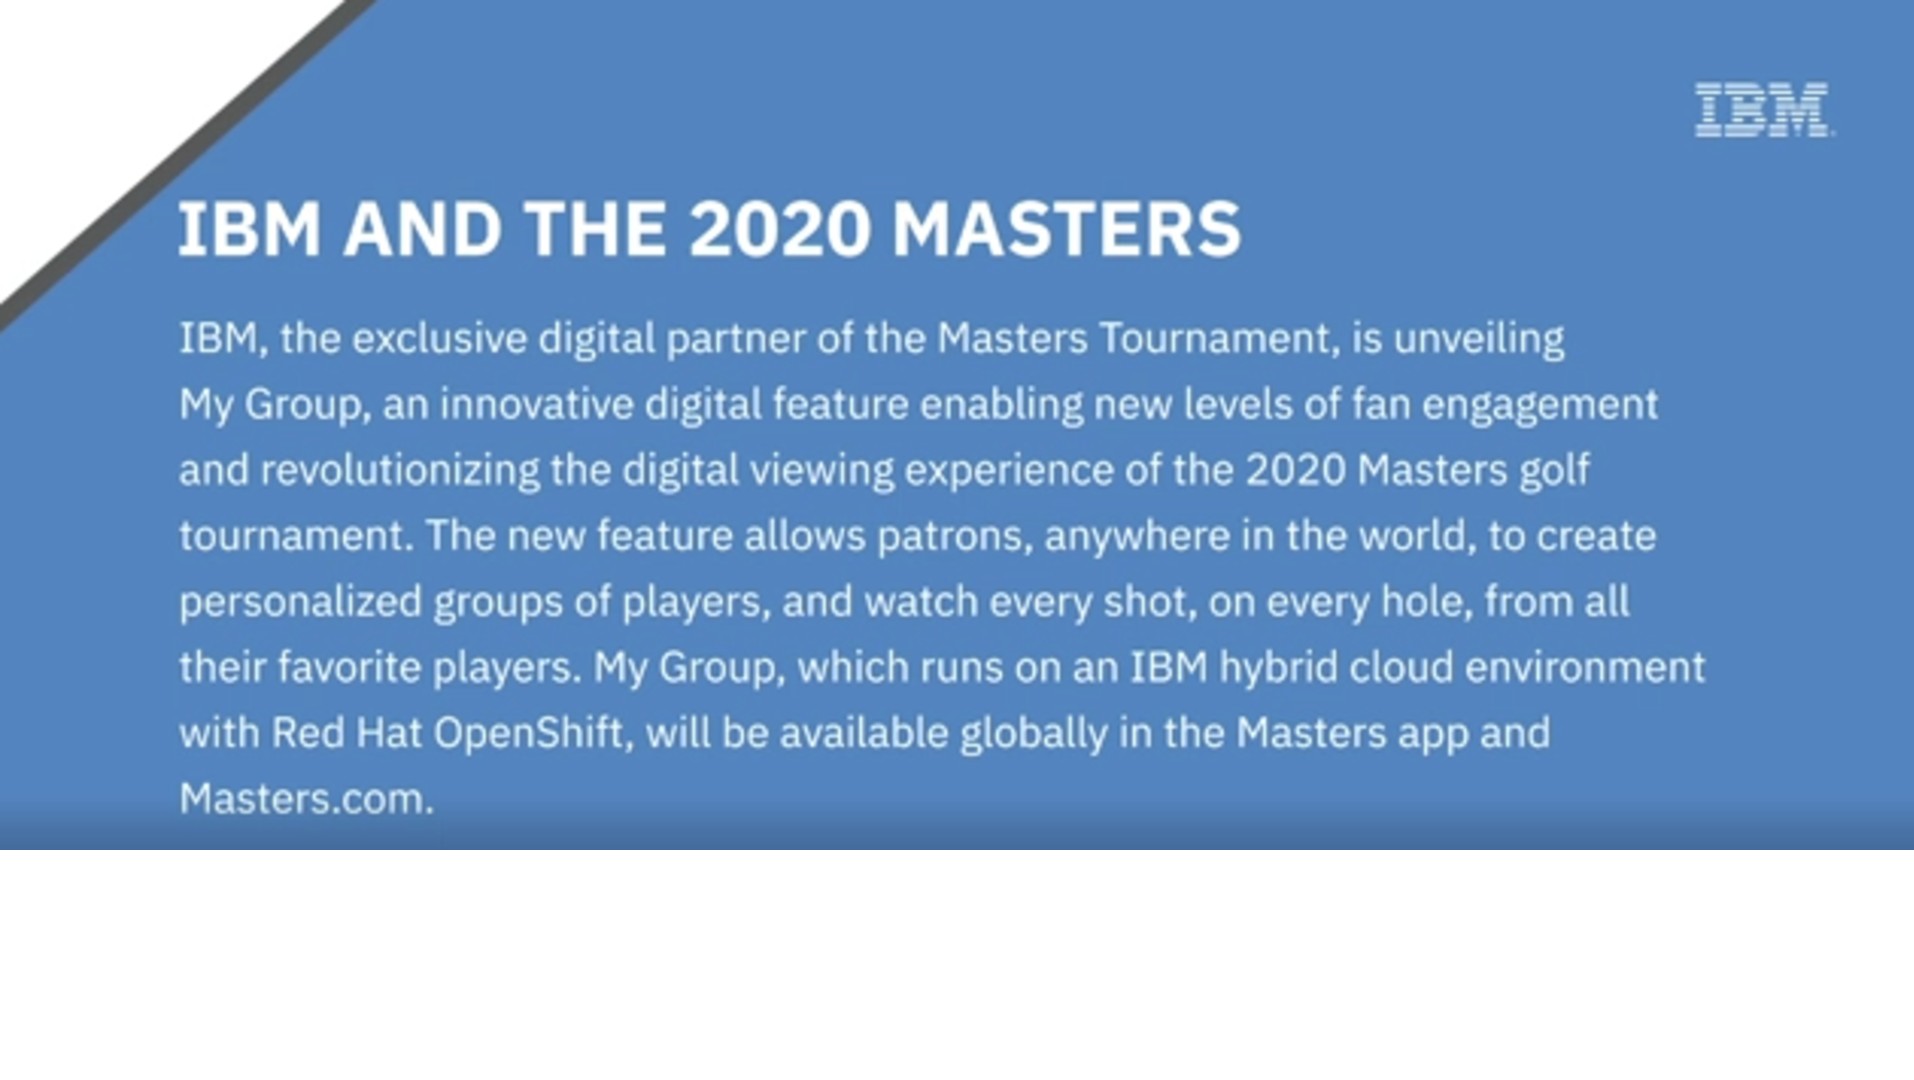 Play Video: IBM and The Masters B-roll including footage of the new My Group Feature and the Augusta National Golf Club grounds.